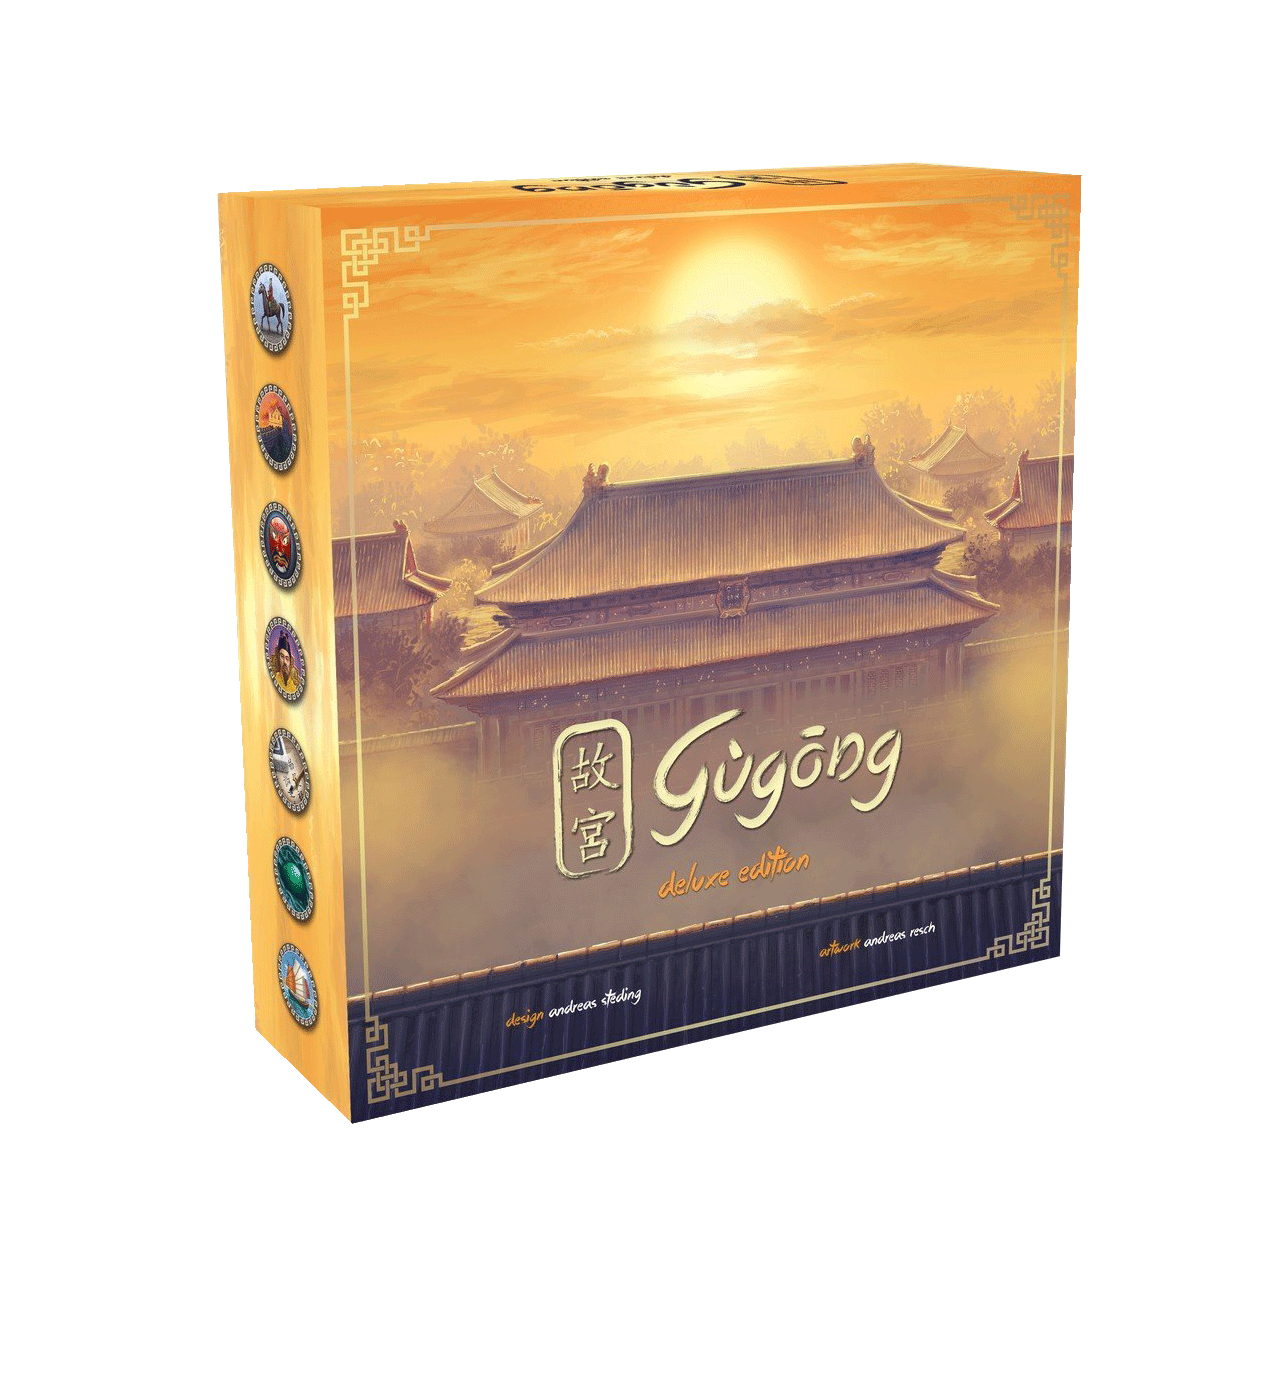 Gugong Deluxe Edition Board Game